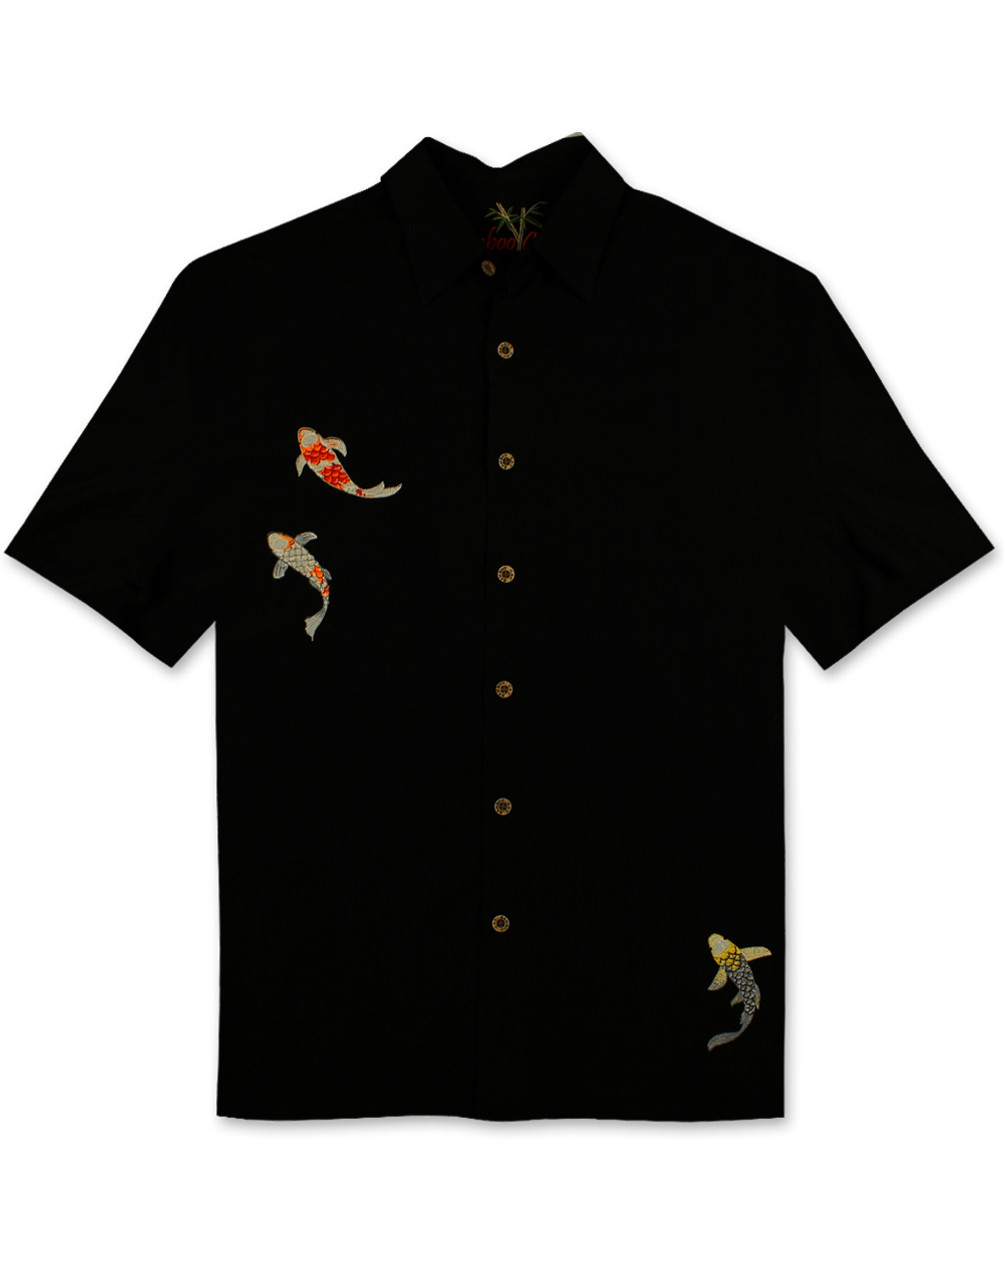 Charming Koi Embroidered Polynosic Camp Shirt by Bamboo Cay - WB1915 Black